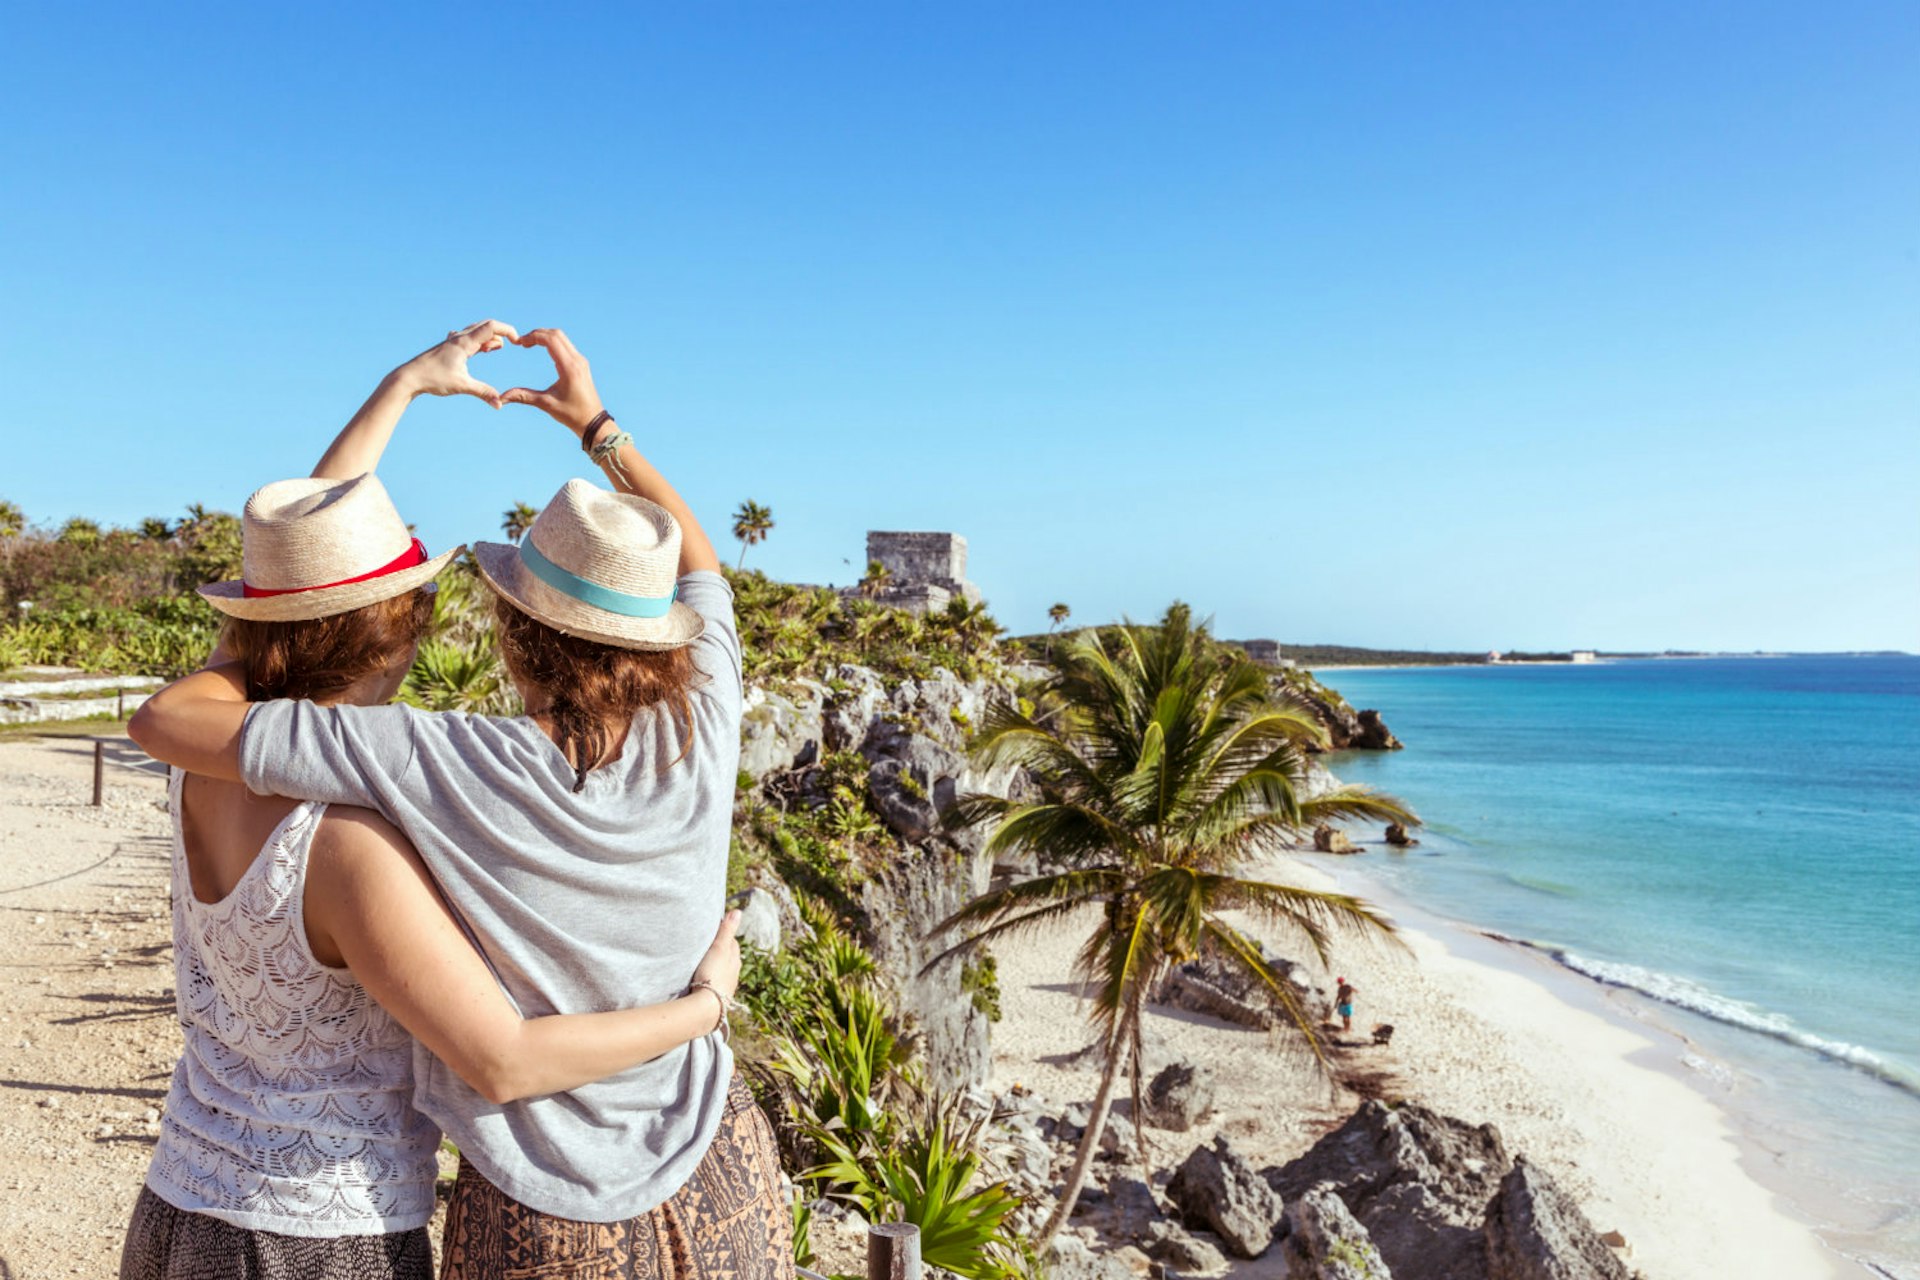 An embracing female couple form a love heart with their hands in front of a tropical beach